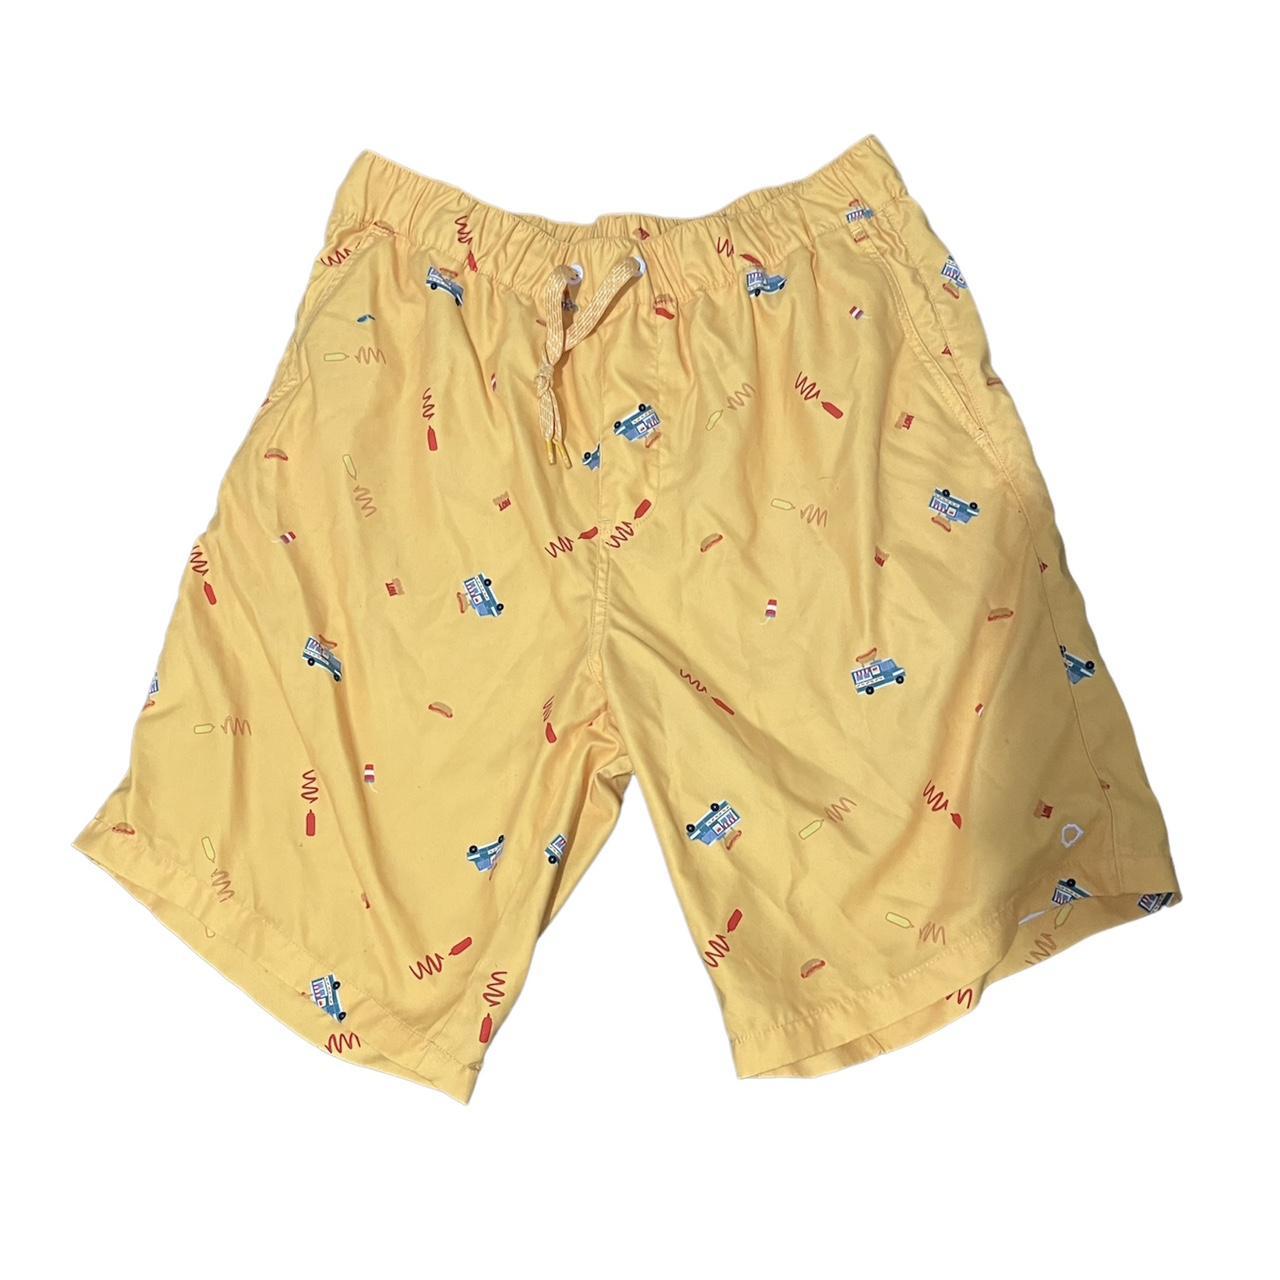 Empyre Men's Yellow and Red Swim-briefs-shorts